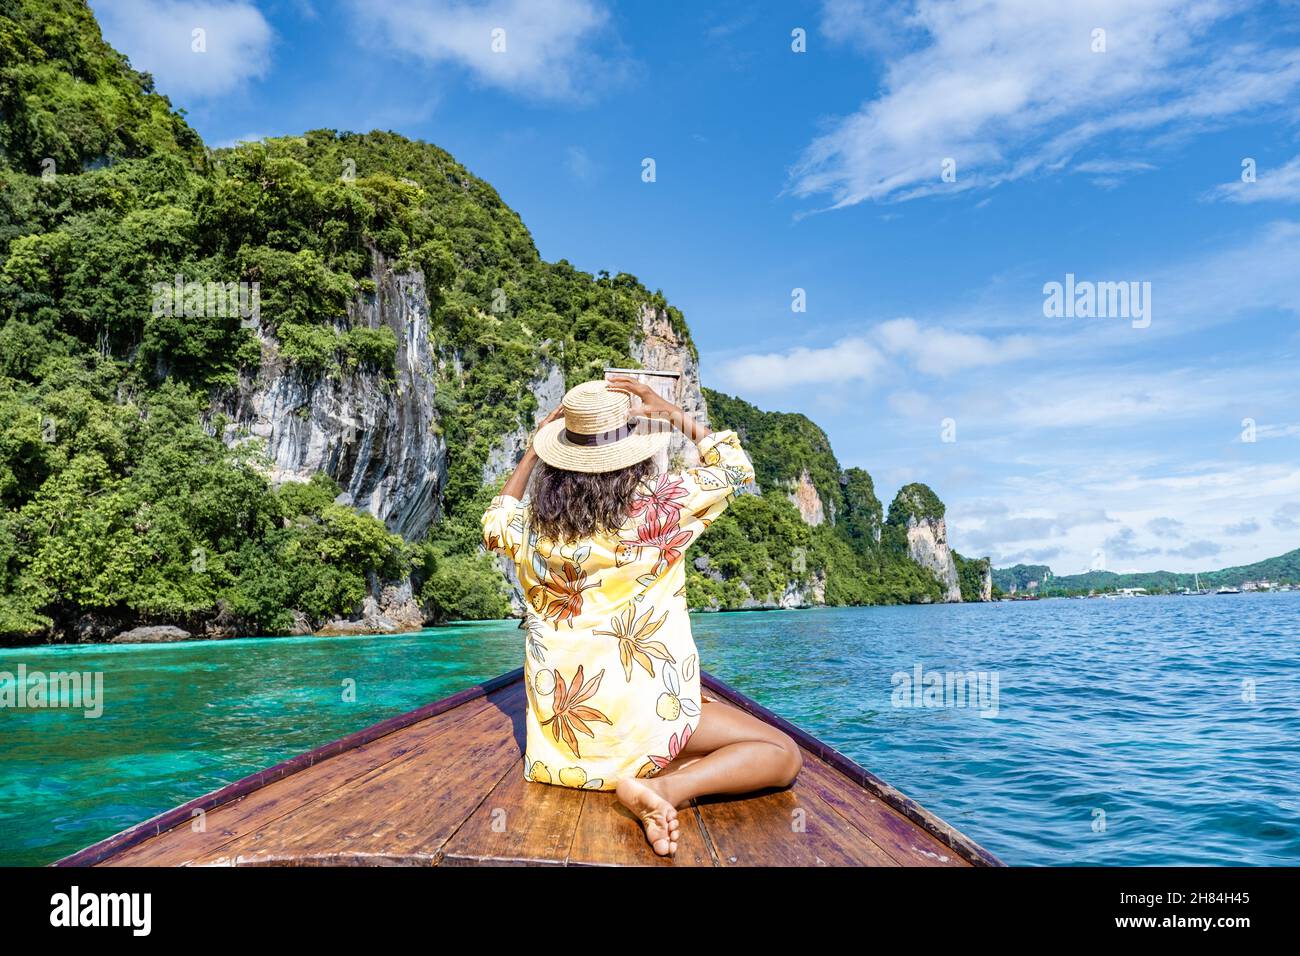 Maya Bay Koh Phi Phi Thailand, Turquoise clear water Thailand Koh Pi Pi,  Scenic aerial view of Koh Phi Phi Island in Thailand. Asian woman mid age  with hat in longtail boat